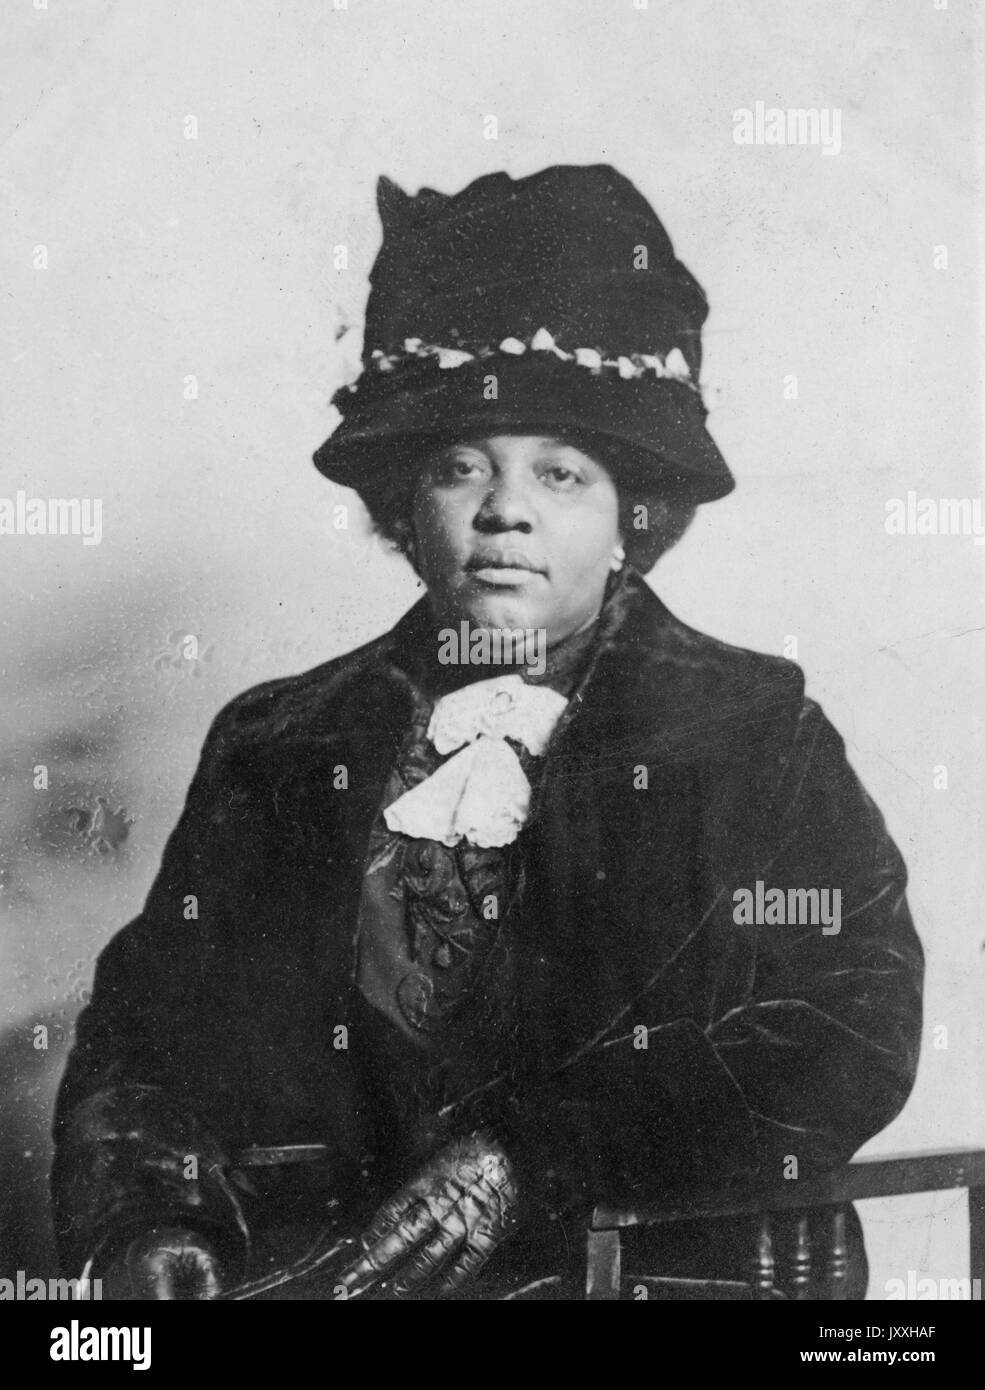 Half length sitting portrait of mature African American woman, wearing dark overcoat, dark blouse with light lace detail, leather gloves and hat, neutral expression, 1920. Stock Photo